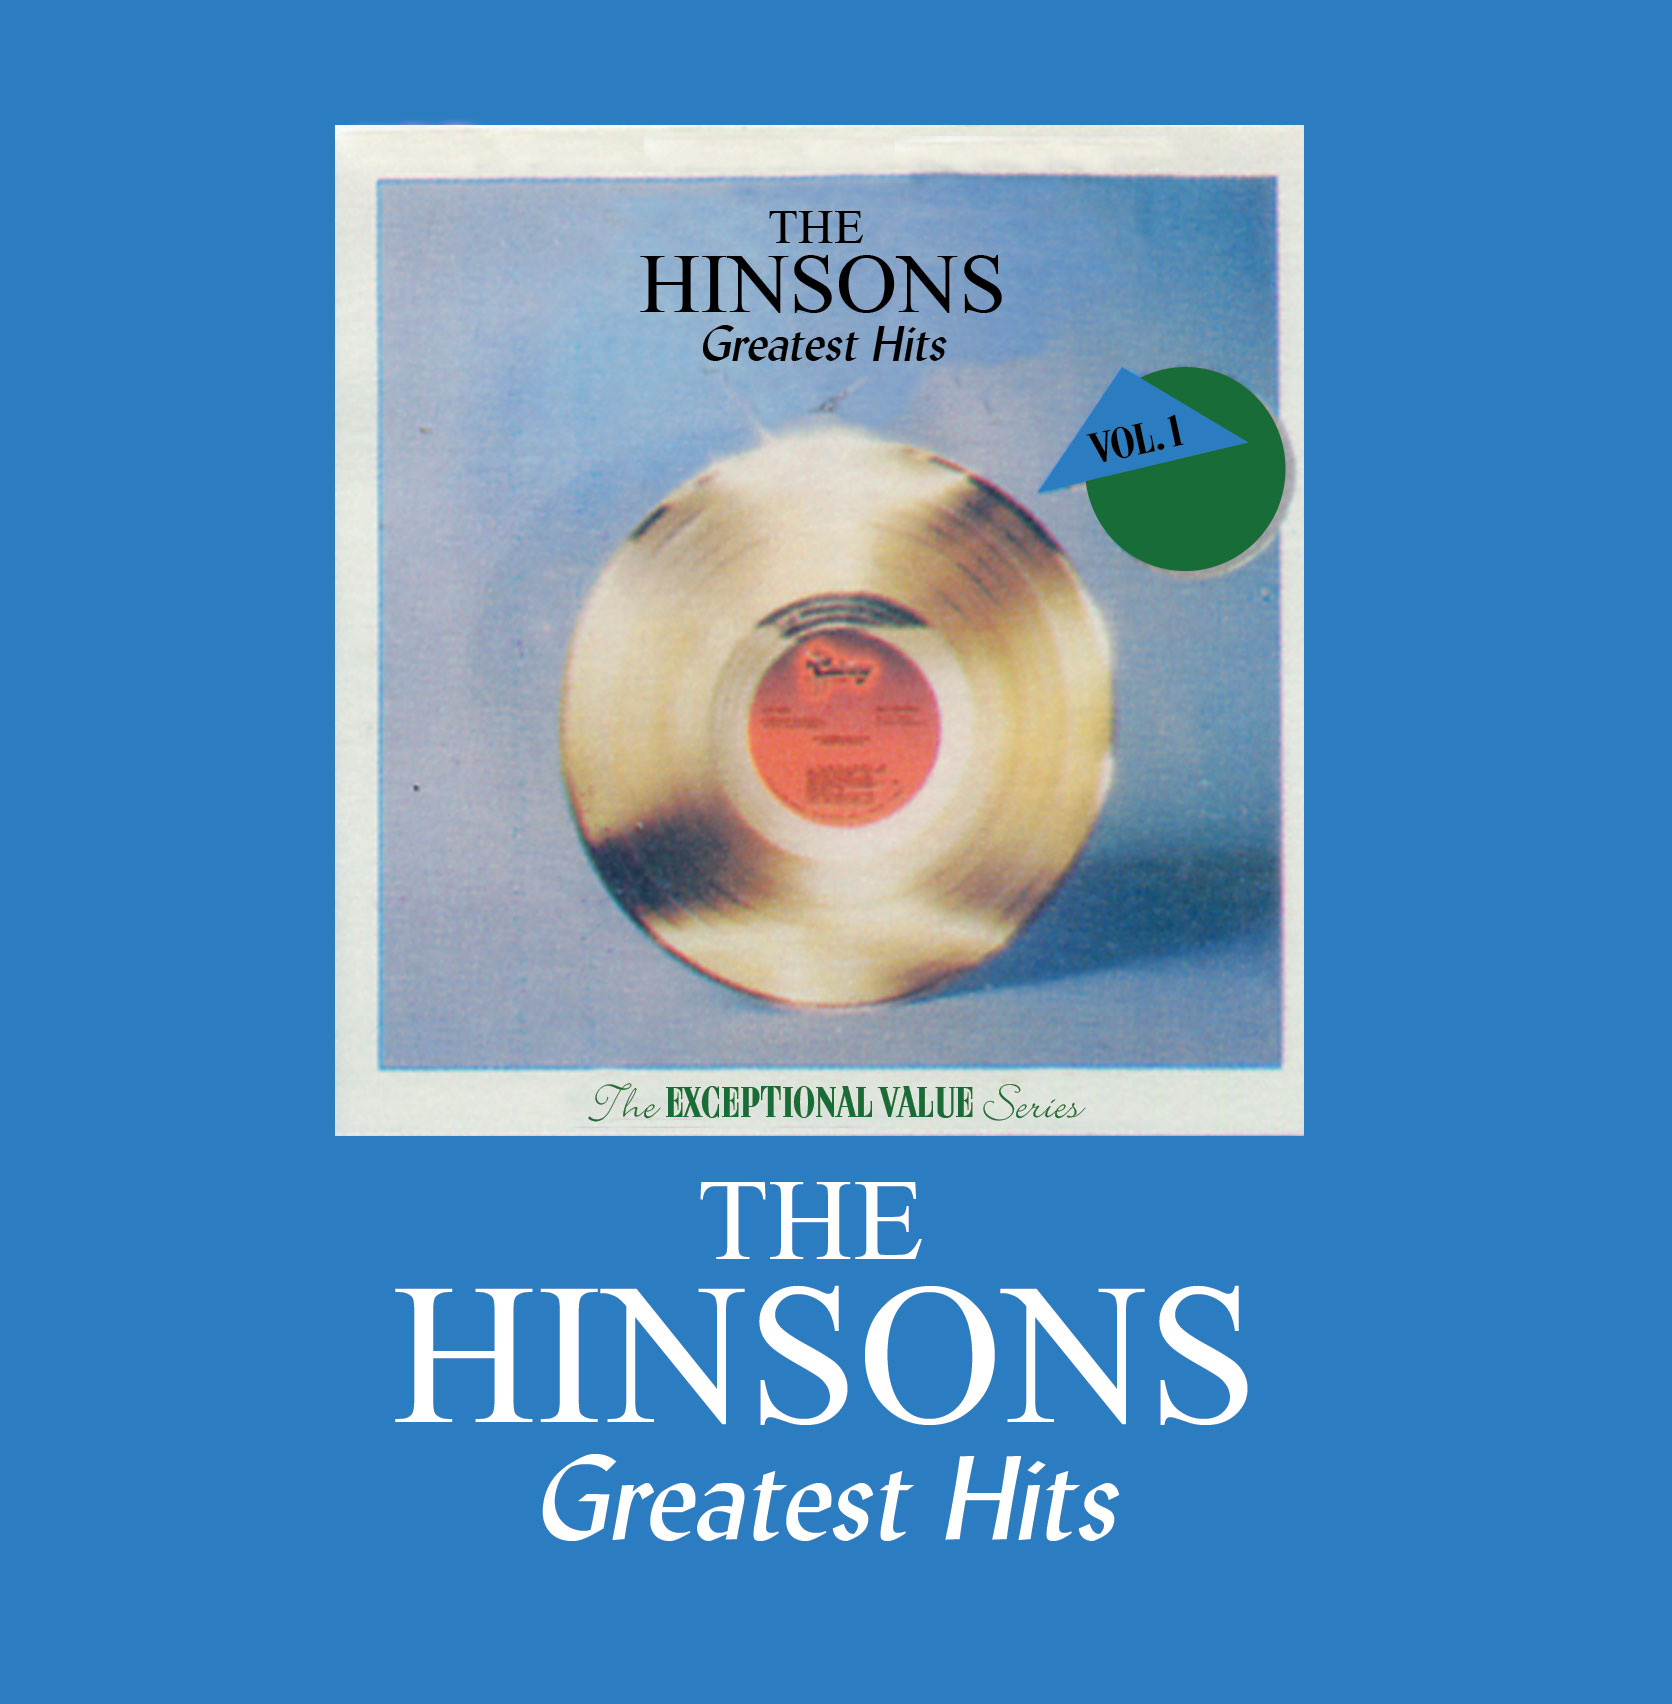 The Hinsons Greatest Hits Vol. 1